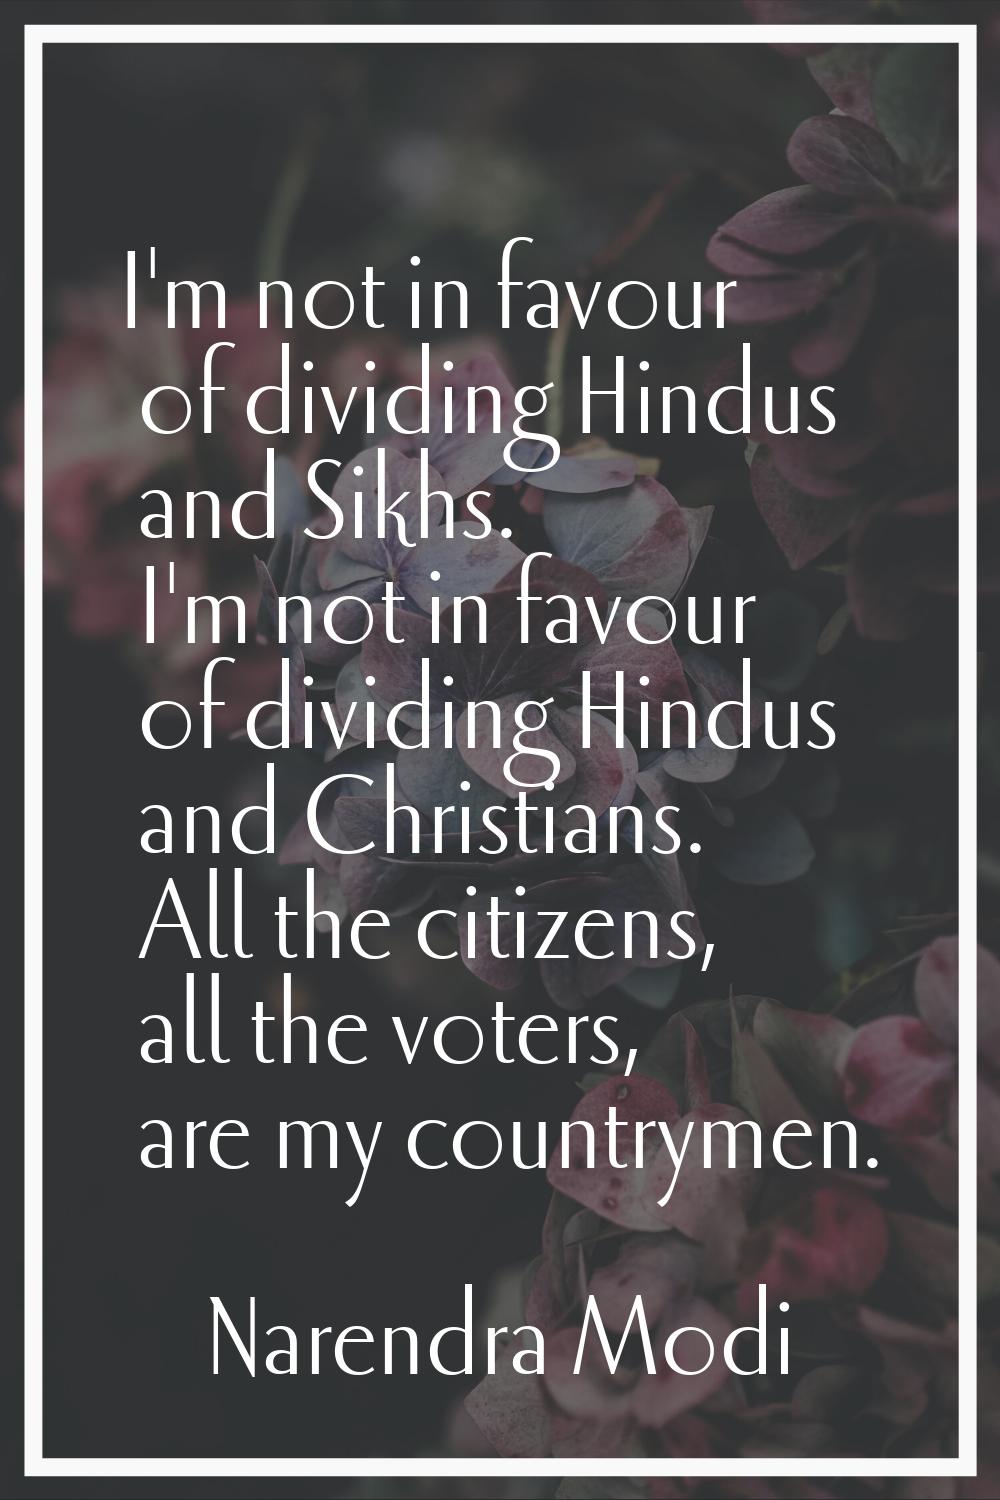 I'm not in favour of dividing Hindus and Sikhs. I'm not in favour of dividing Hindus and Christians